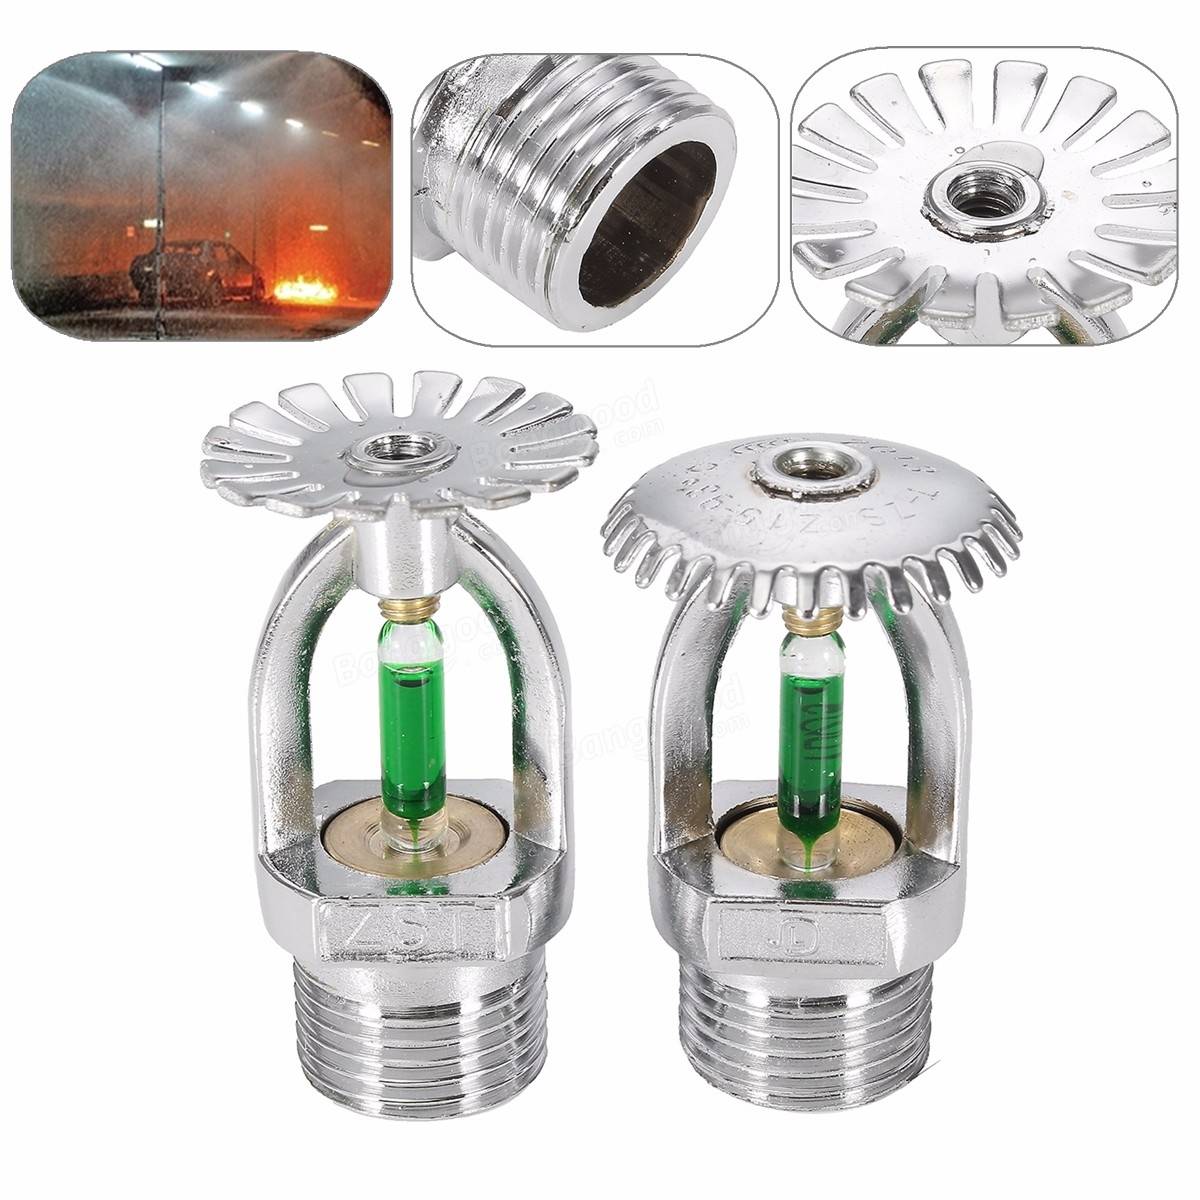 93℃ Automatic Fire Extinguishing Sprinkler head93℃ Automatic Fire Extinguishing Sprinkler head